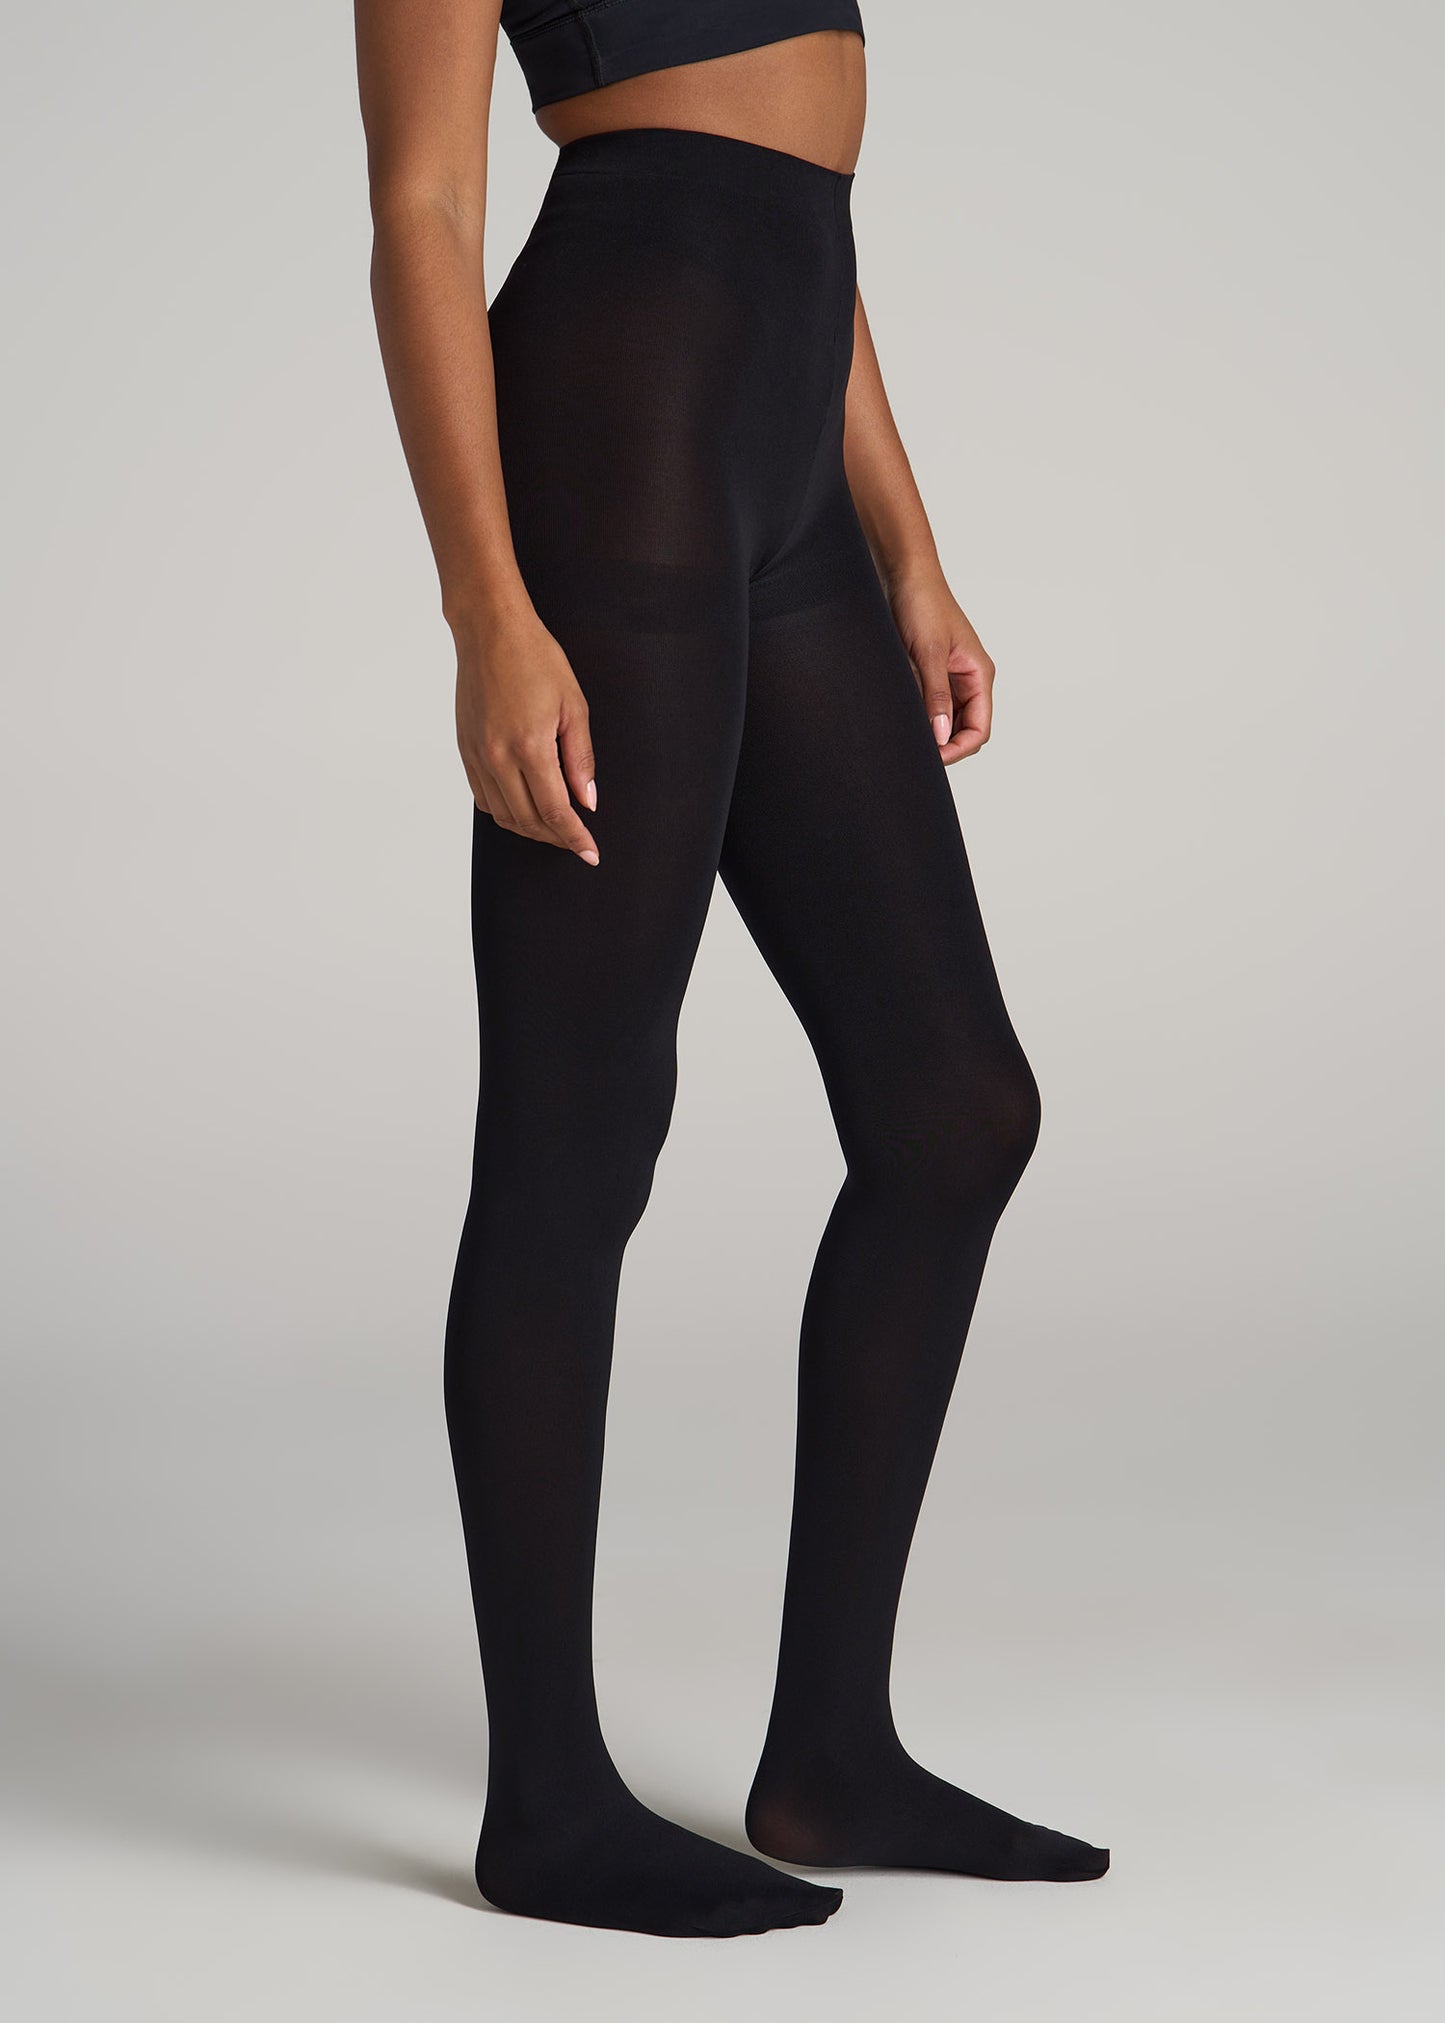 Tights for Tall Women